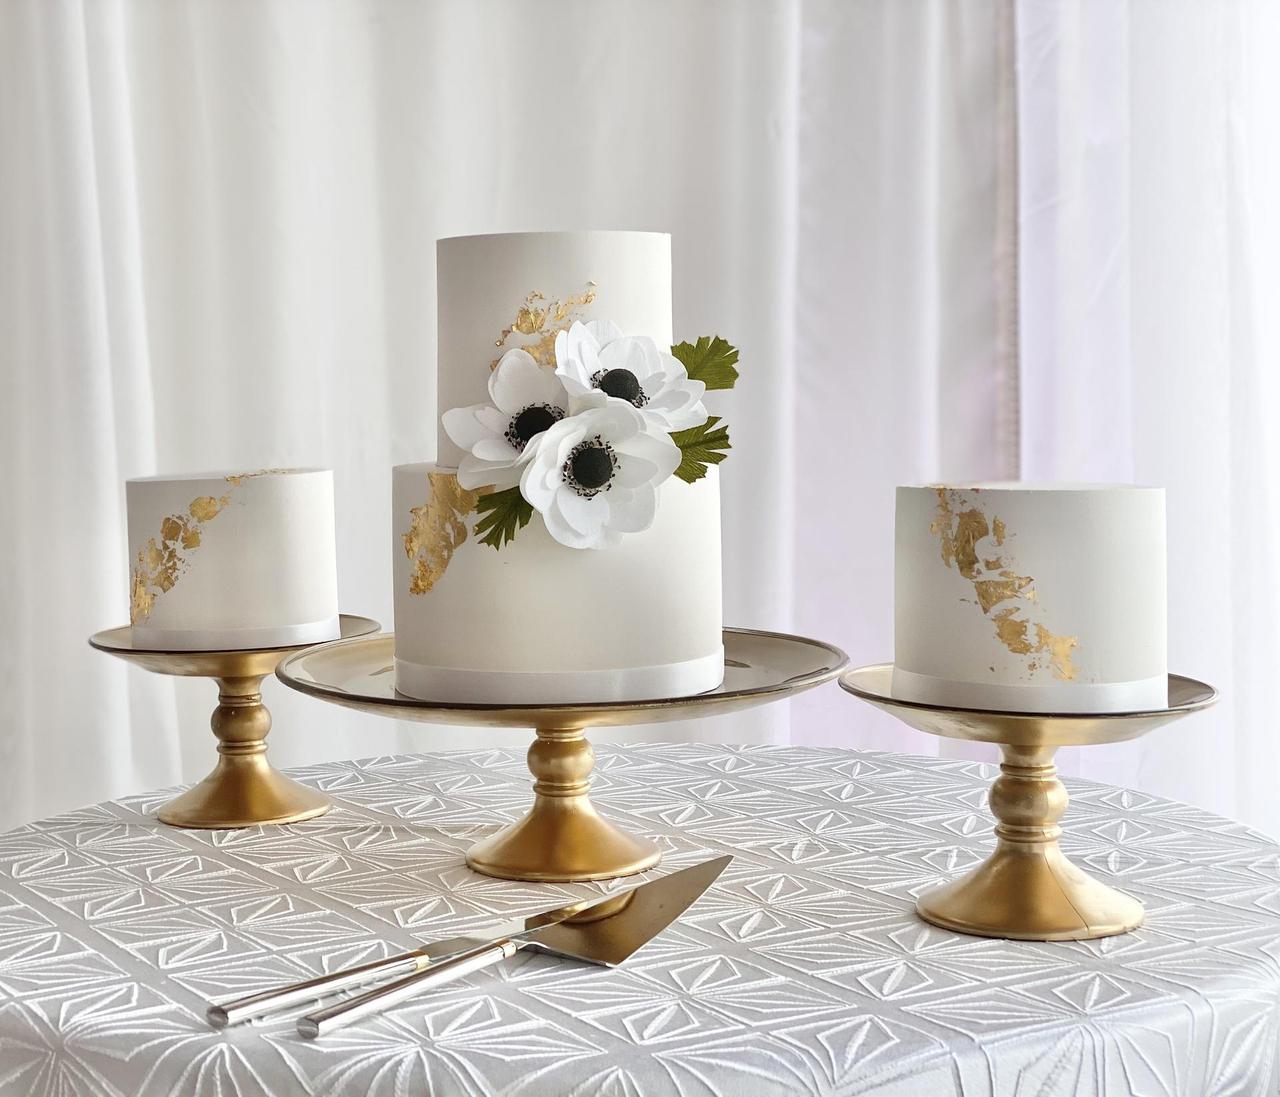 30 Modern Wedding Cake Designs You Simply Have to See | One Fab Day